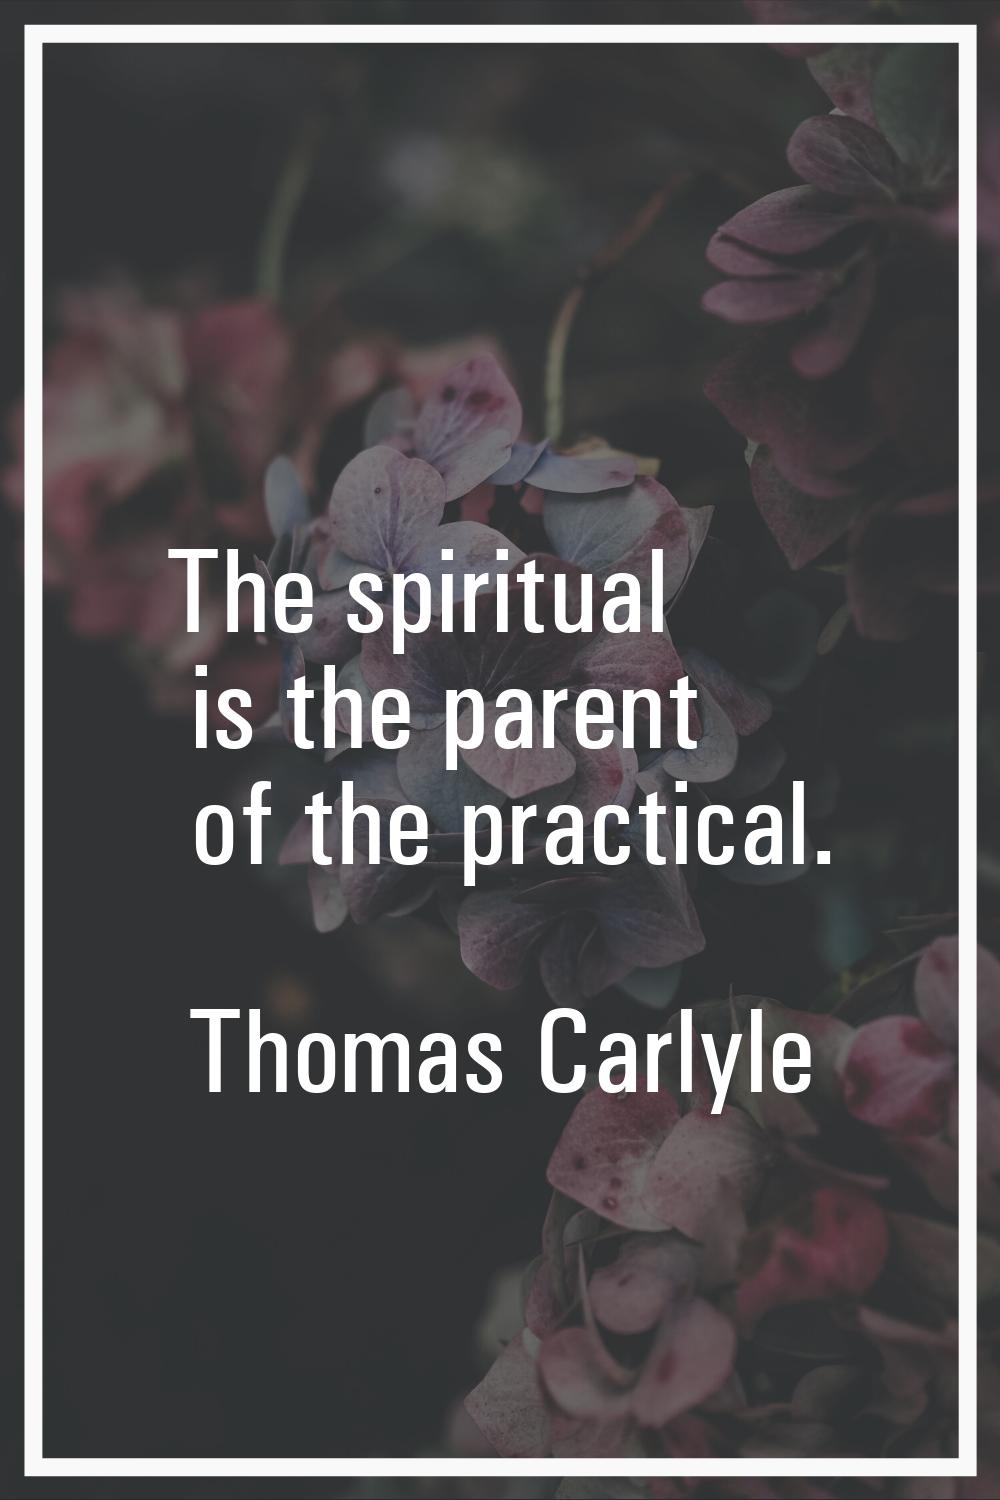 The spiritual is the parent of the practical.